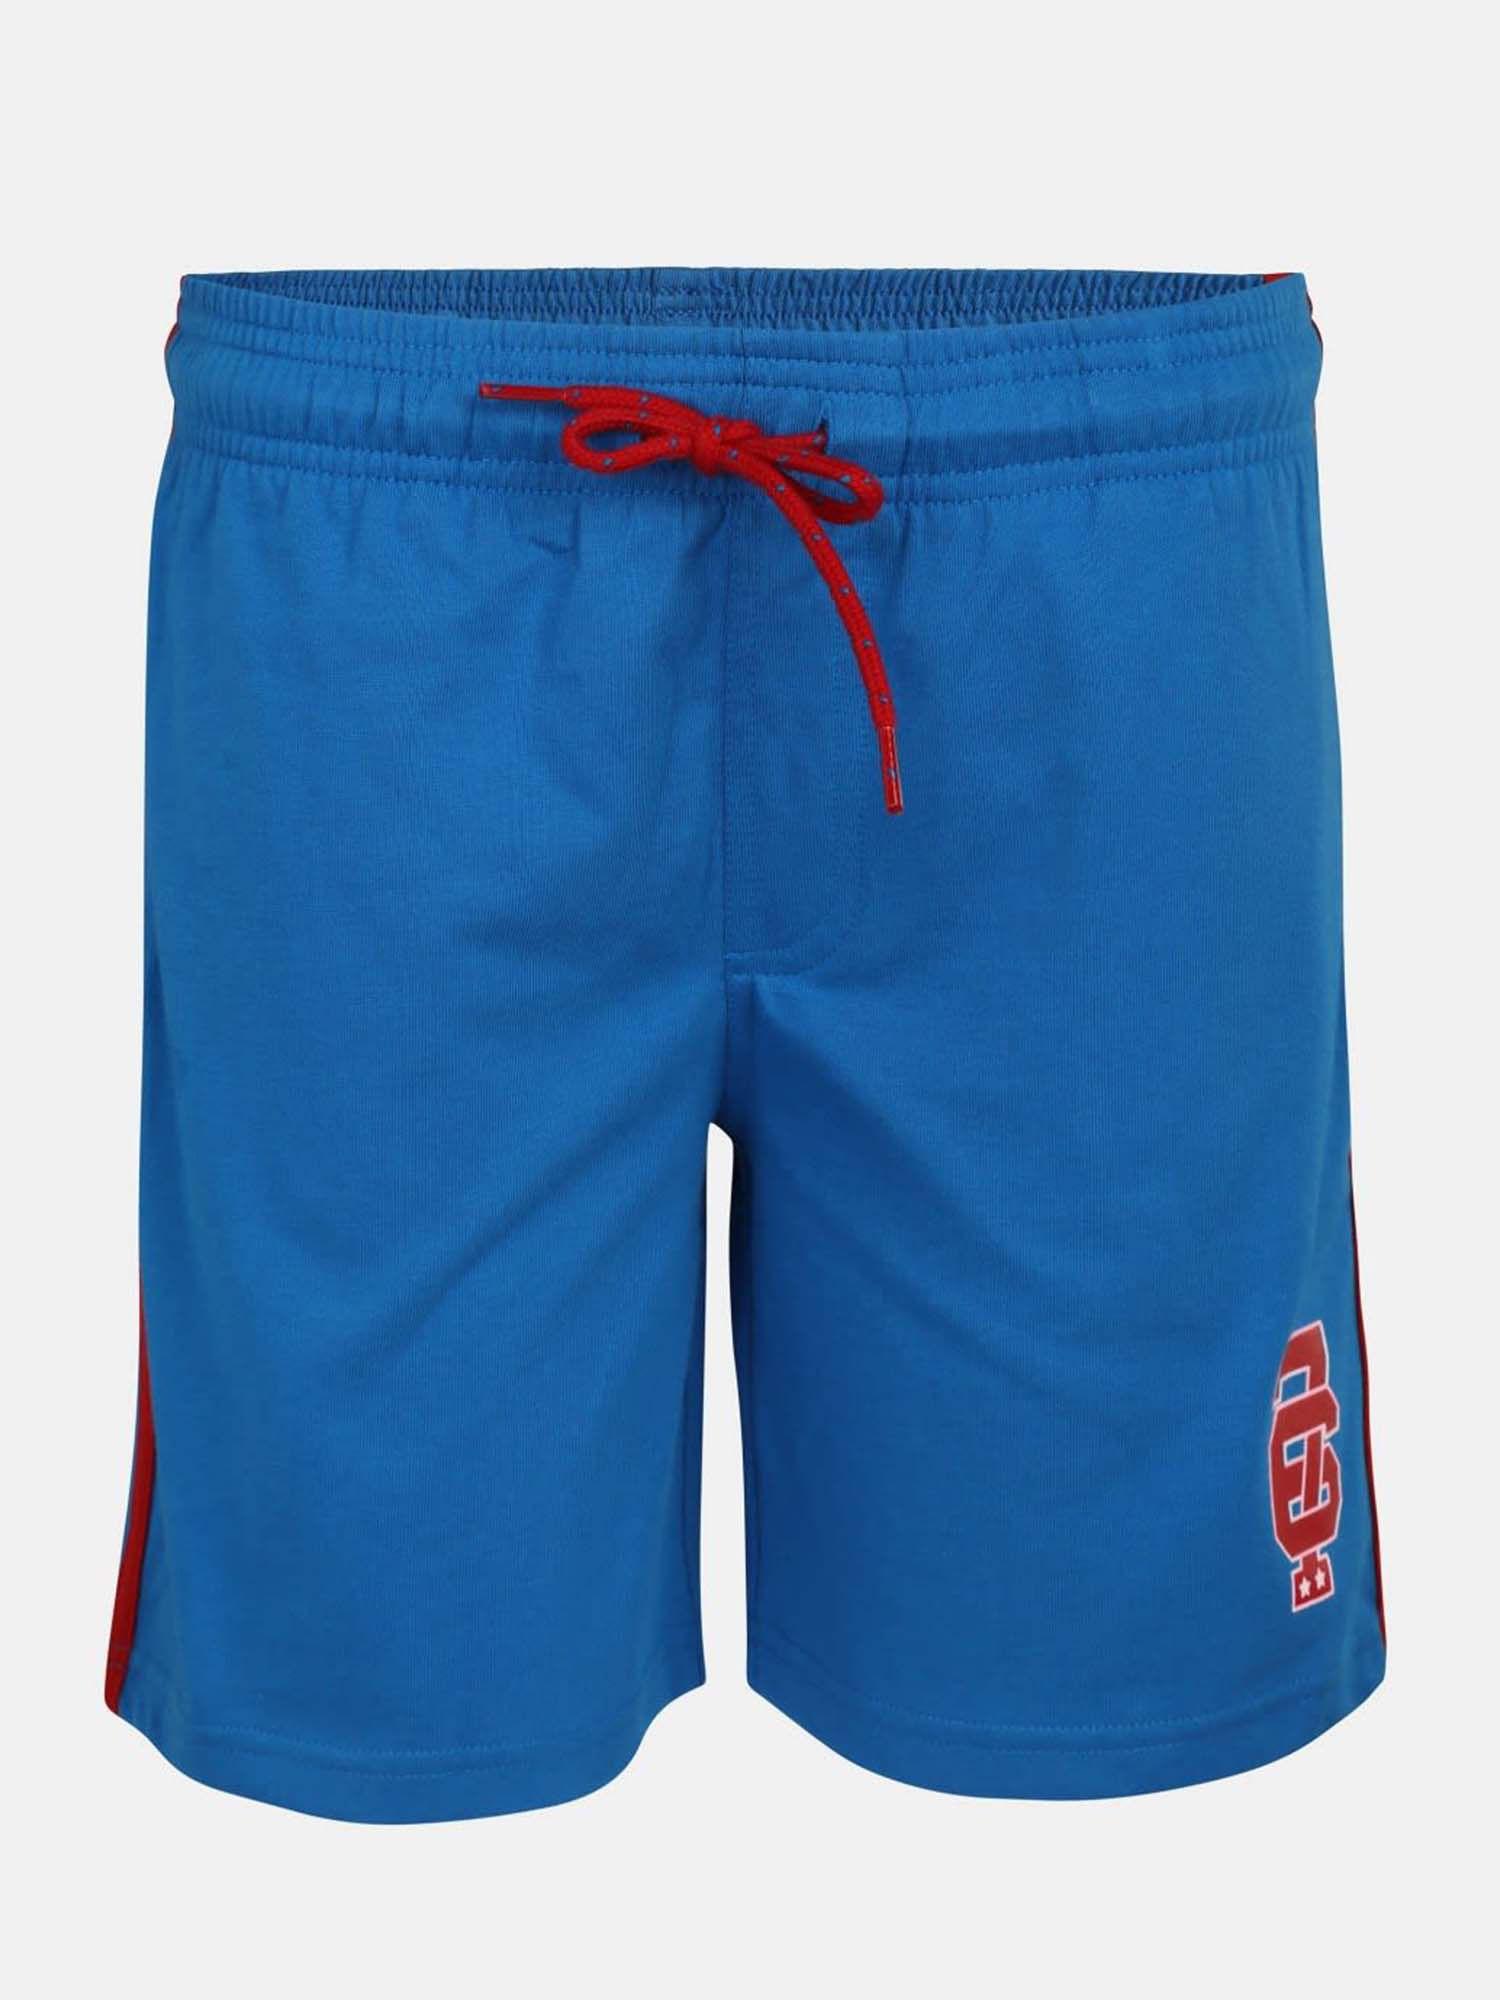 neon blue boys shorts - style number - (ab11)